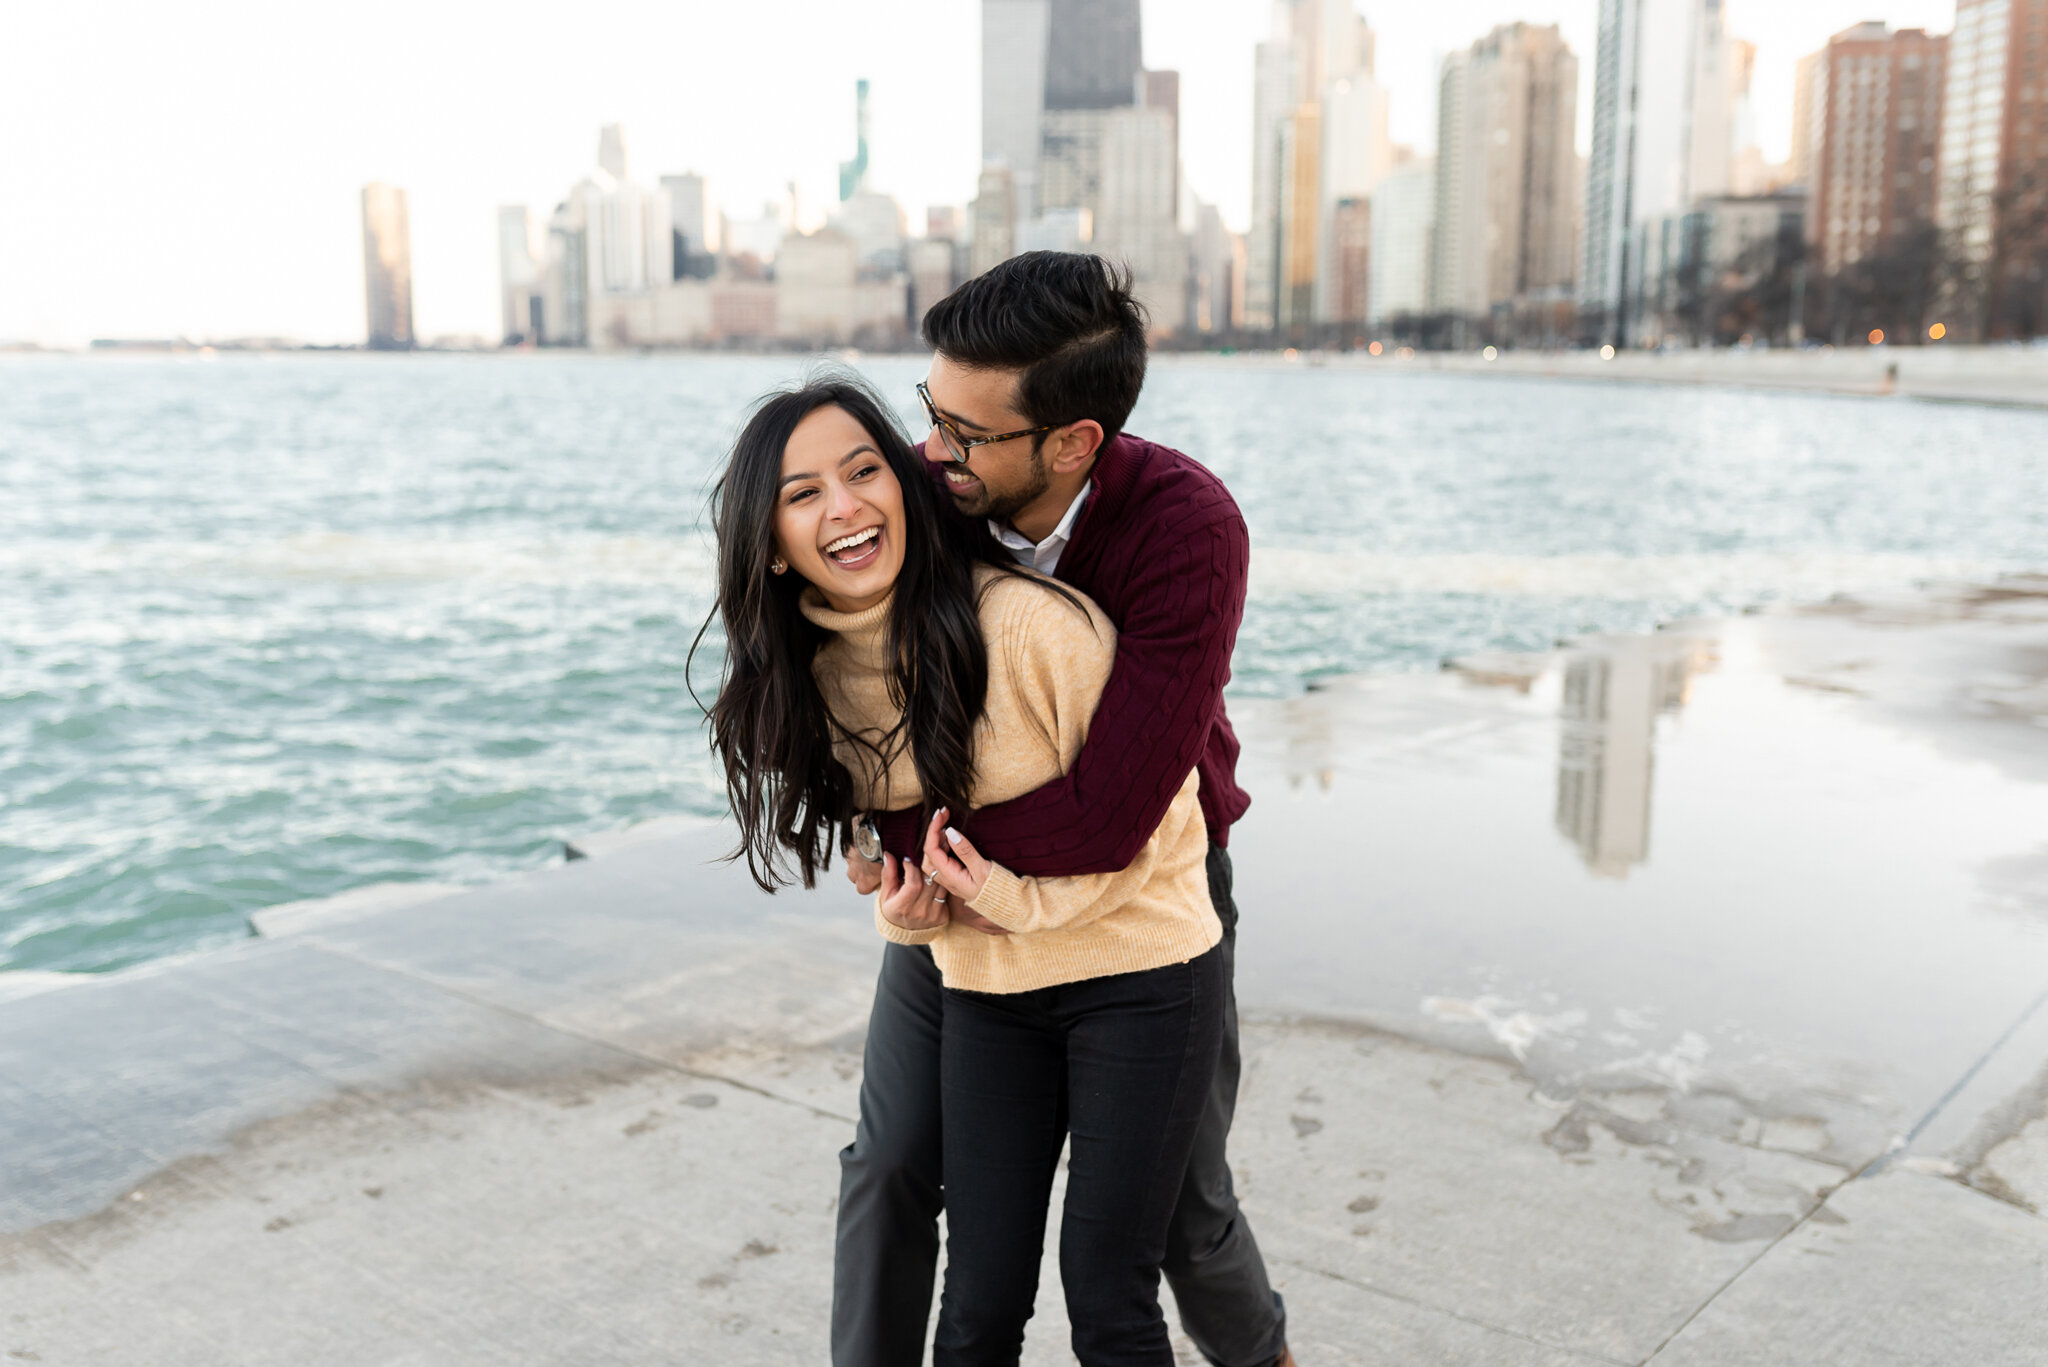 Glenview Engagement Photographer, Chicago Engagement Photographer, Chicago Engagement Photography, North Avenue Beach Engagement Session, Chicago Engagement Session (14 of 22).jpg